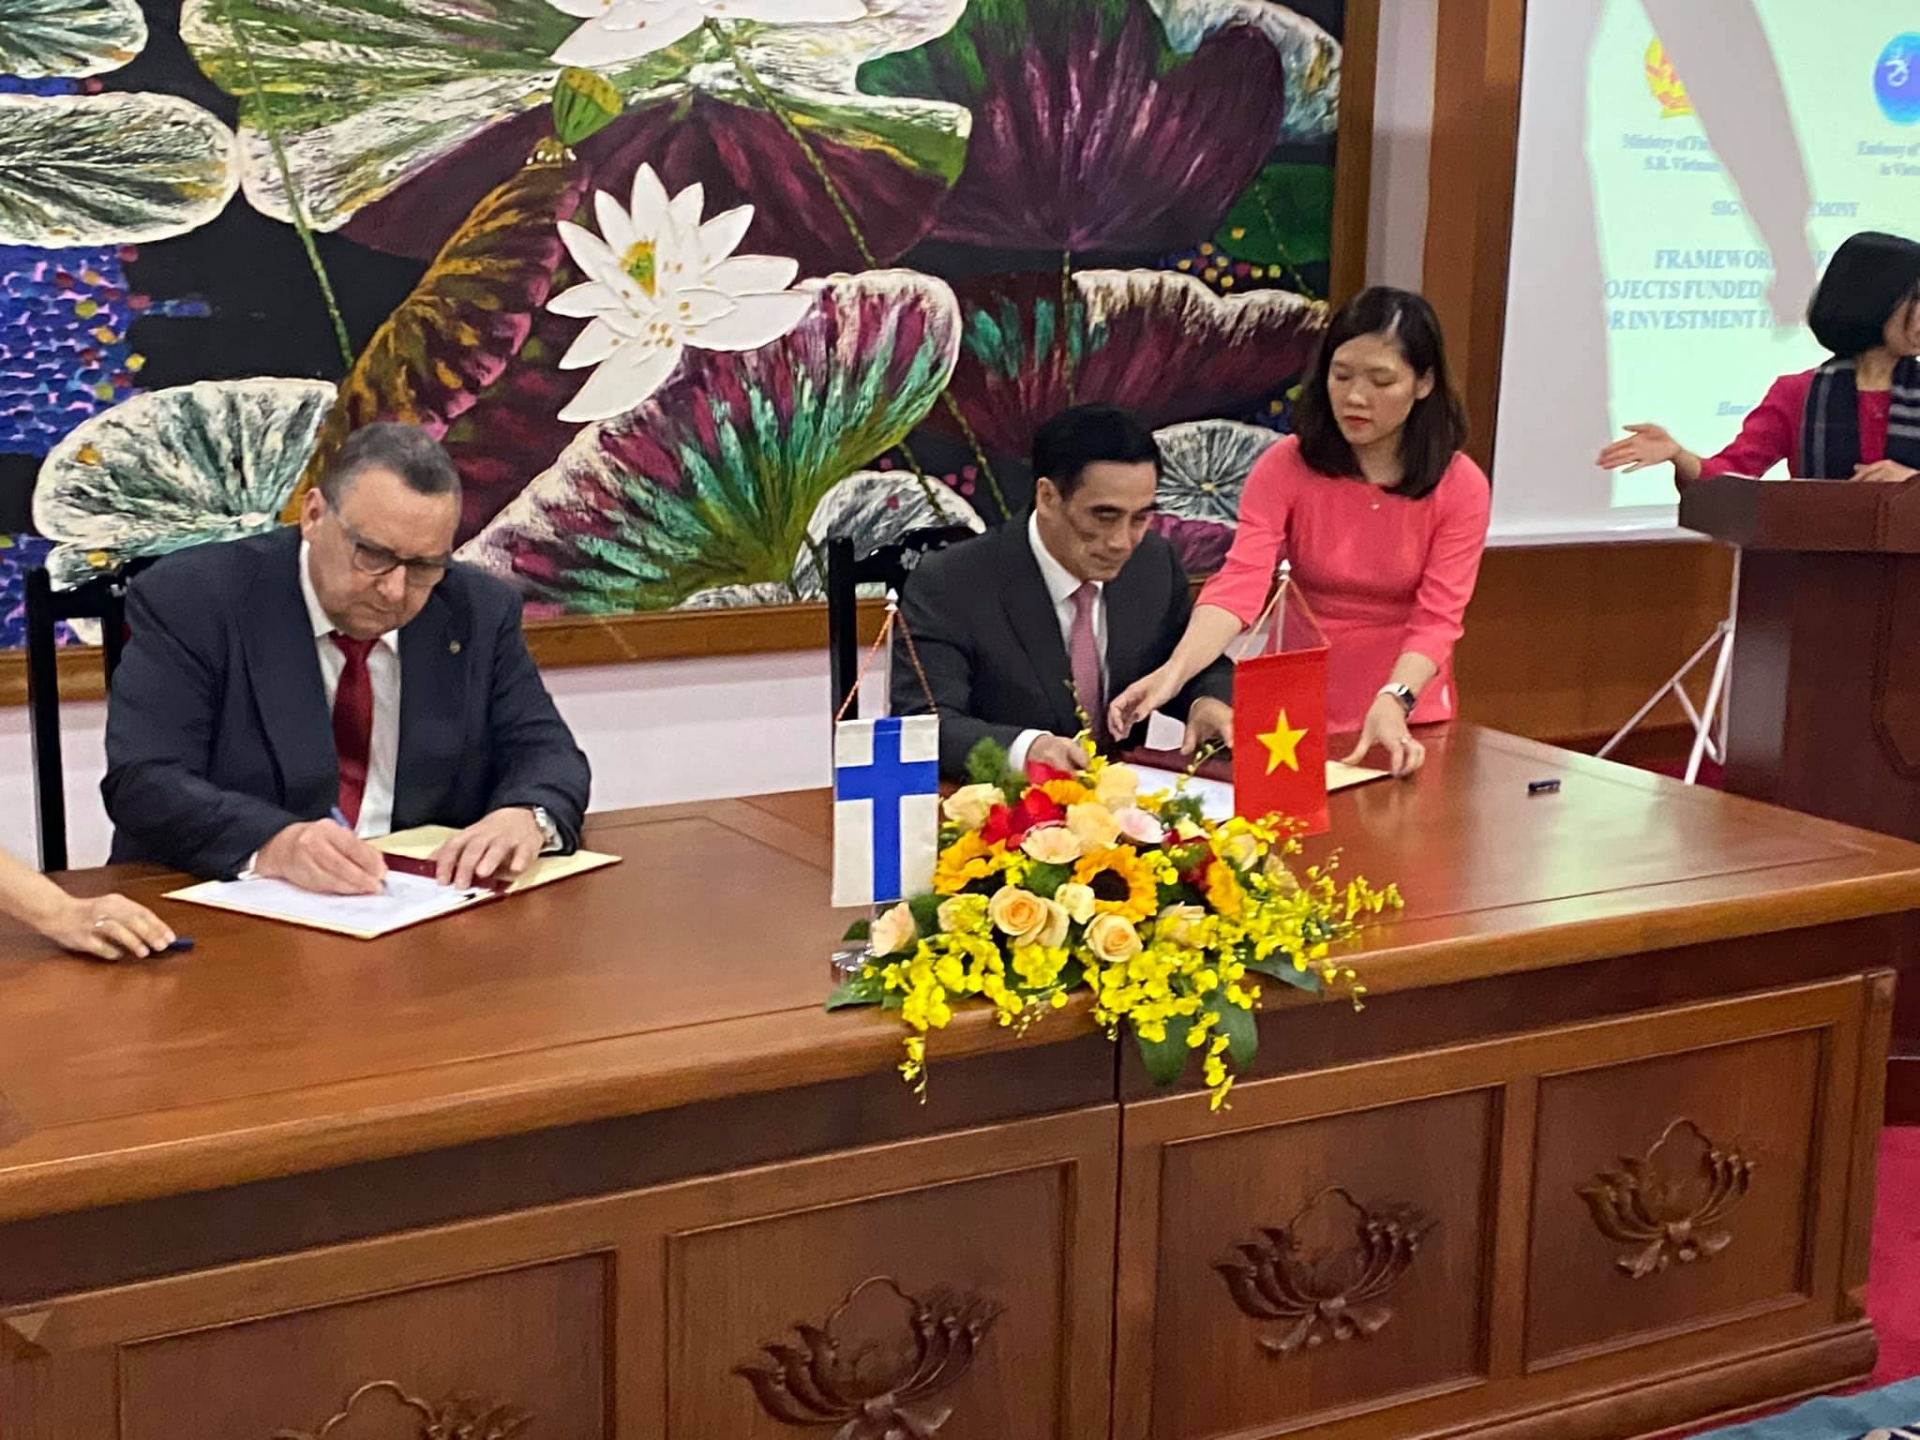 100 million USD provided by Finland for Vietnam's public sector investment